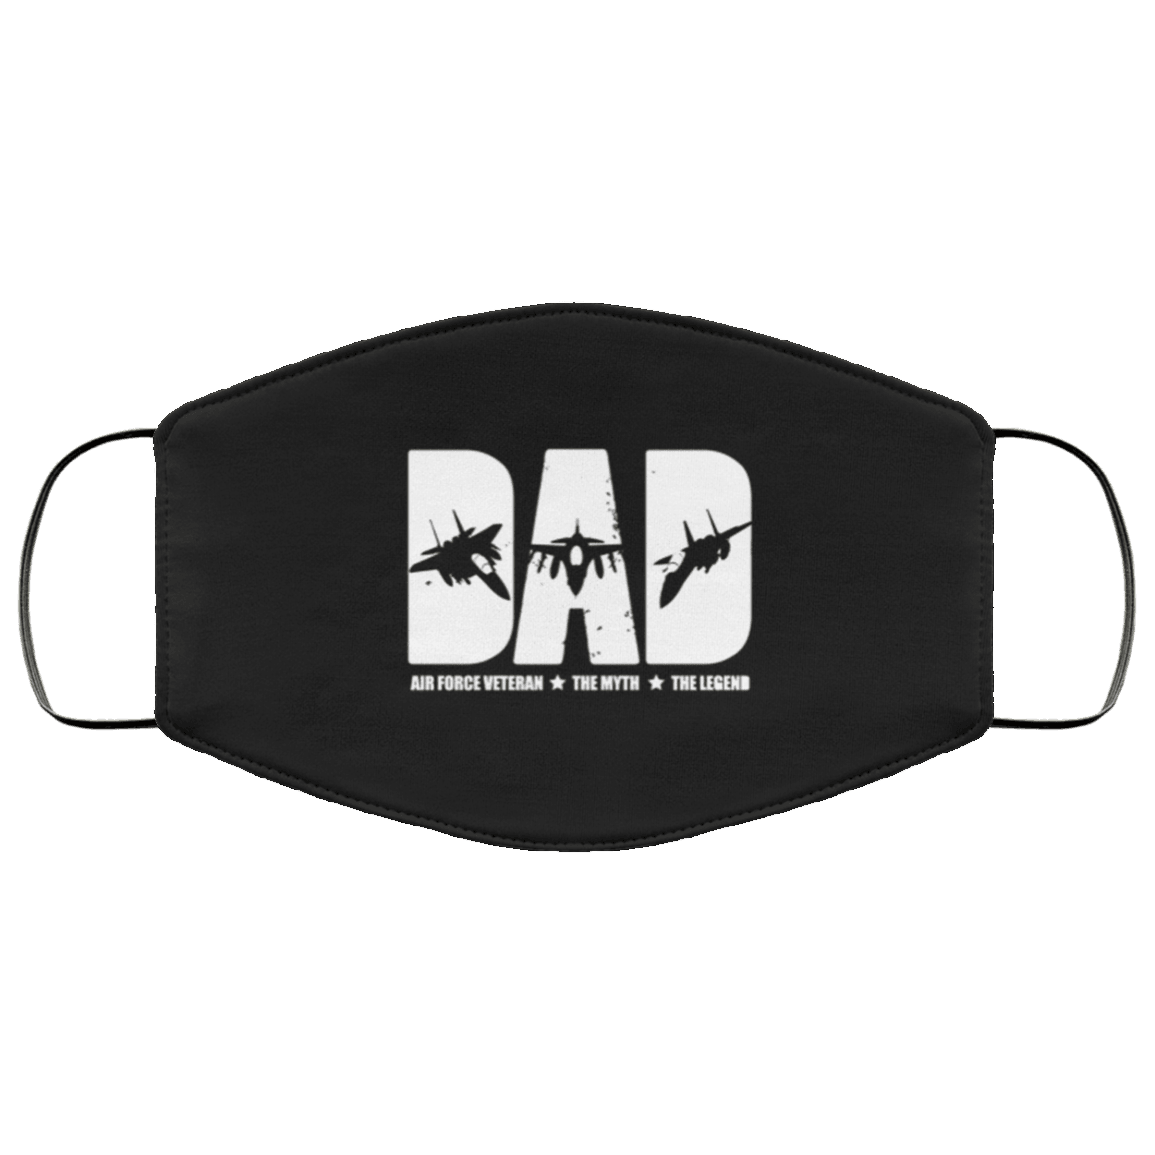 Designs by MyUtopia Shout Out:DAD Air Force Veteran Myth Legend Adult Fabric Face Mask with Elastic Ear Loops,3 Layer Fabric Face Mask / Black / Adult,Fabric Face Mask